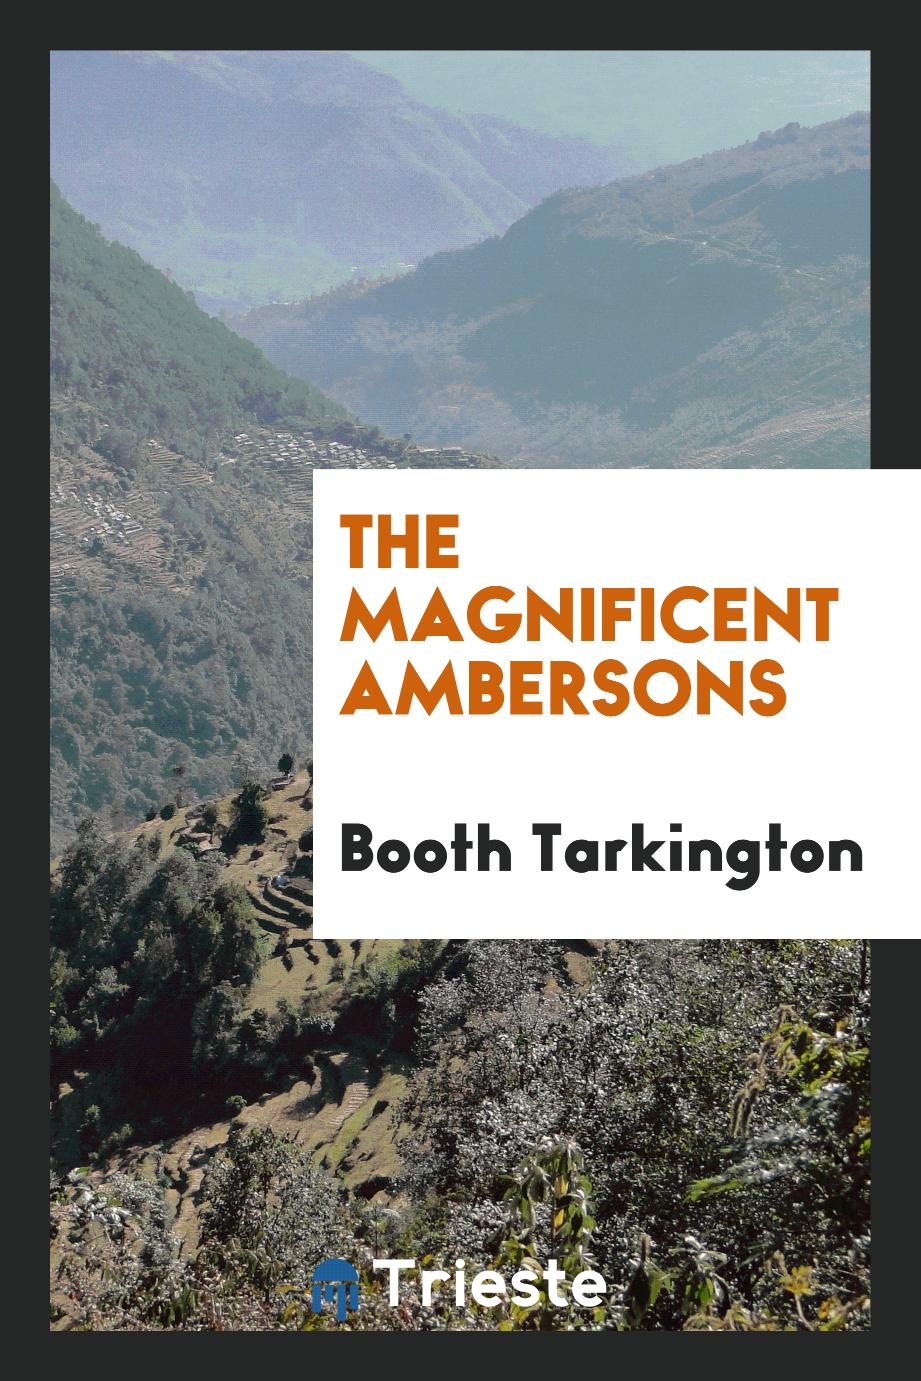 The magnificent Ambersons